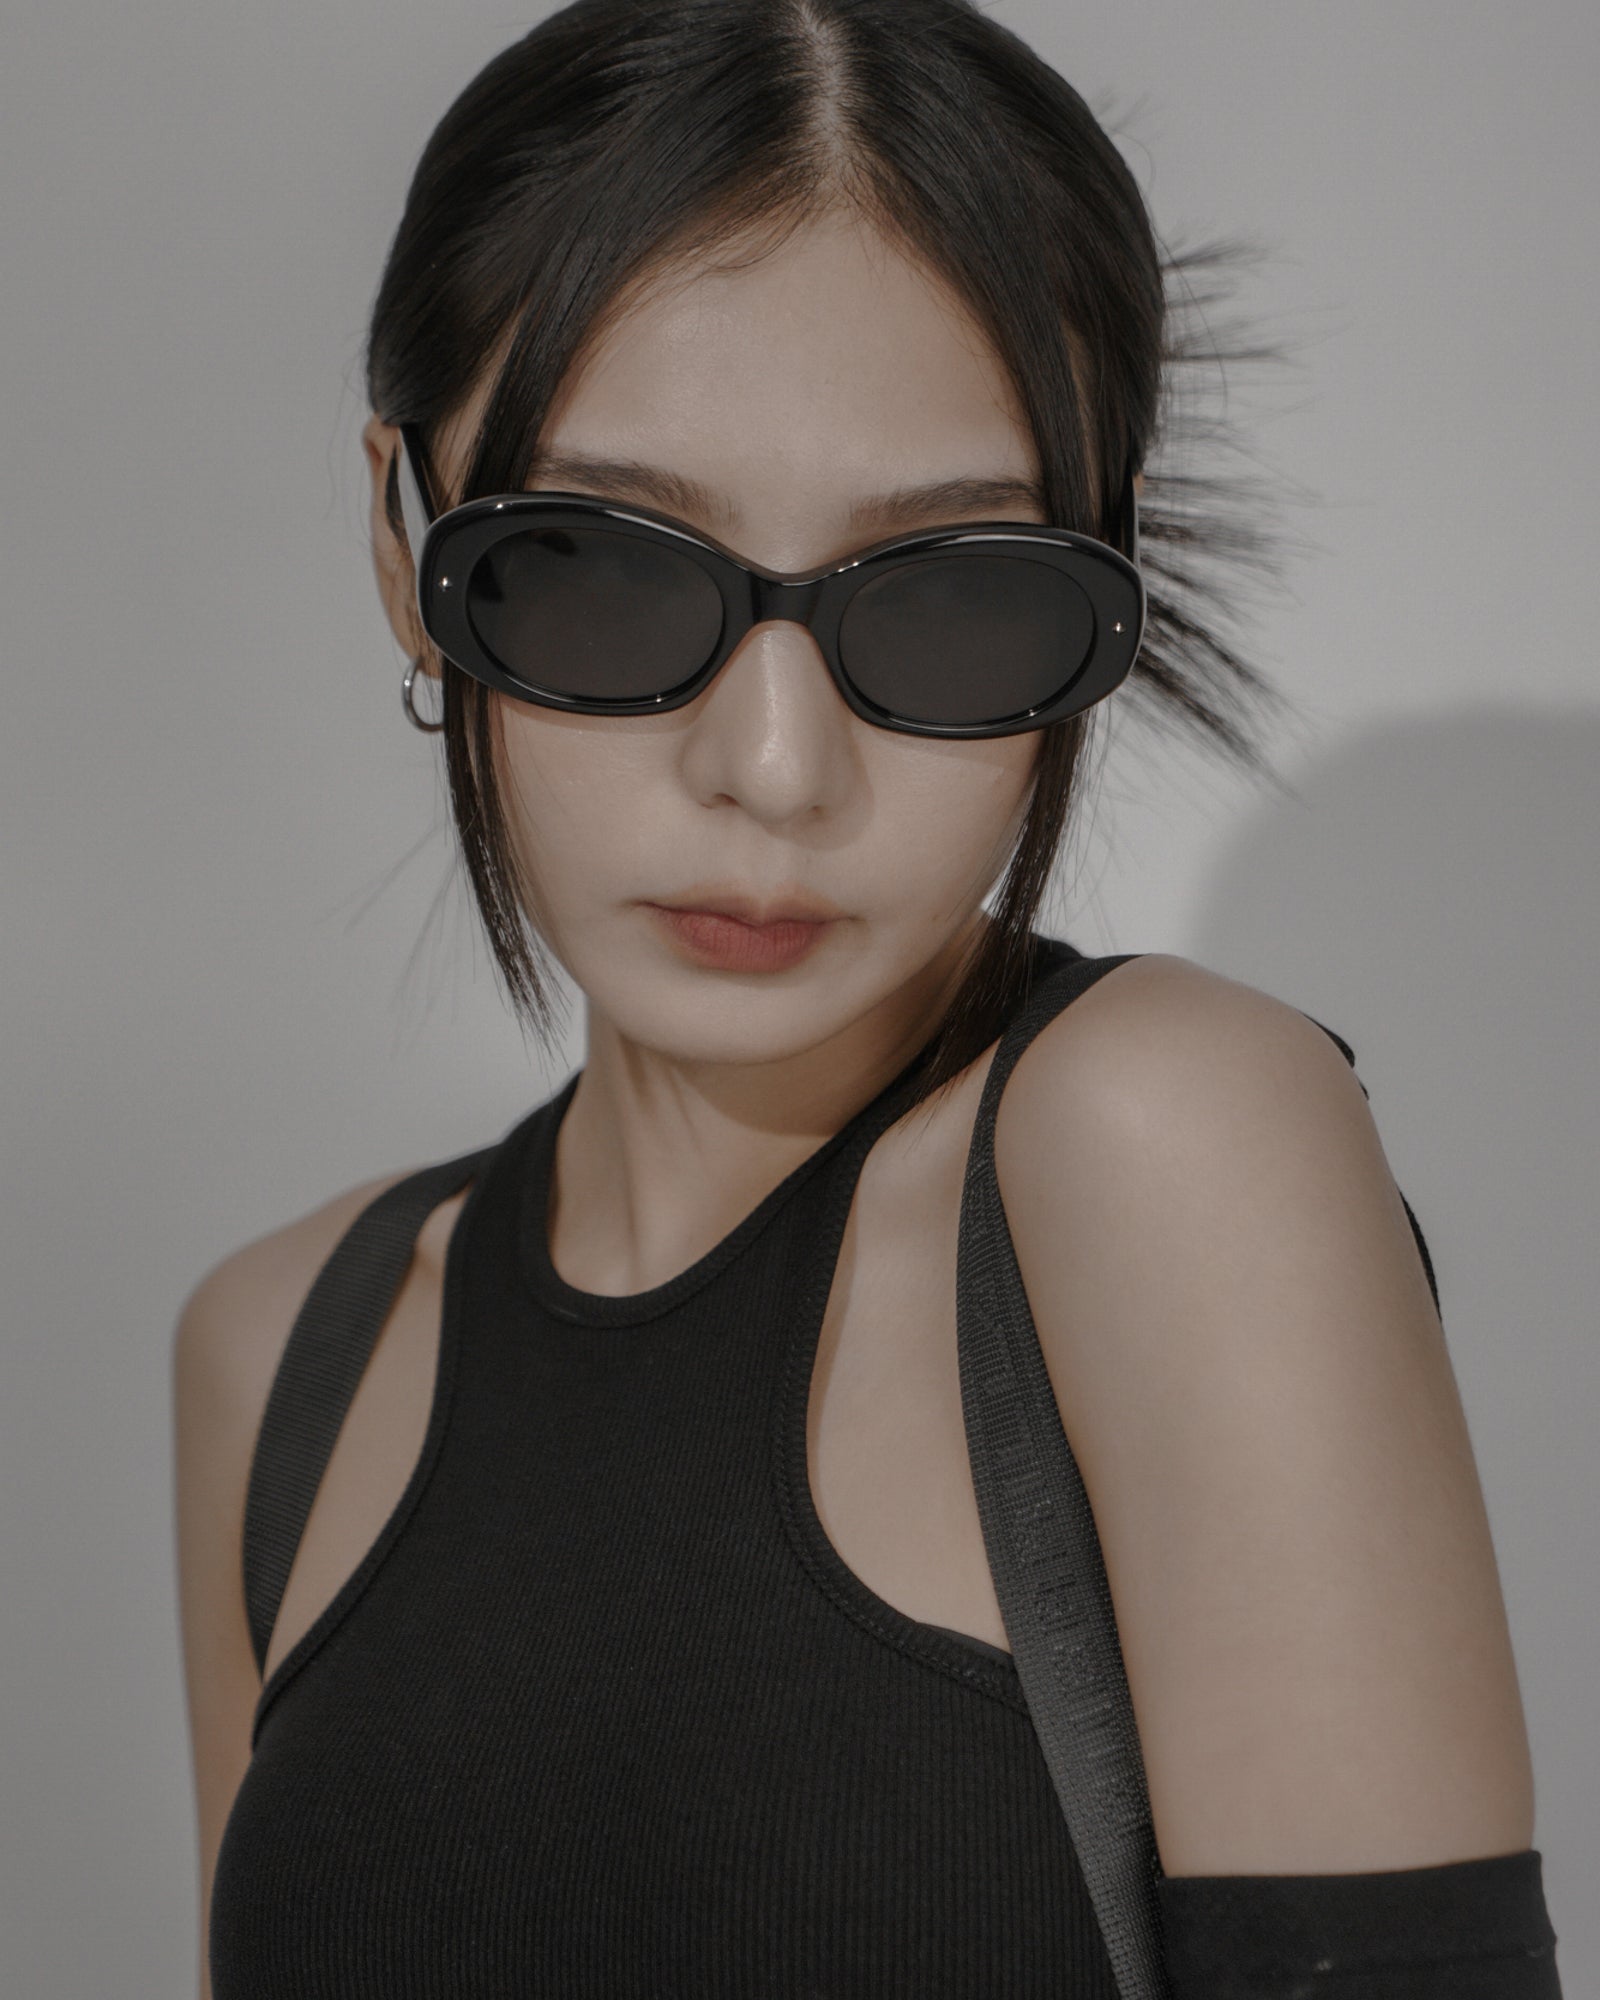 BR01｜SUNGLASSES SERIES - yunivers hsieh